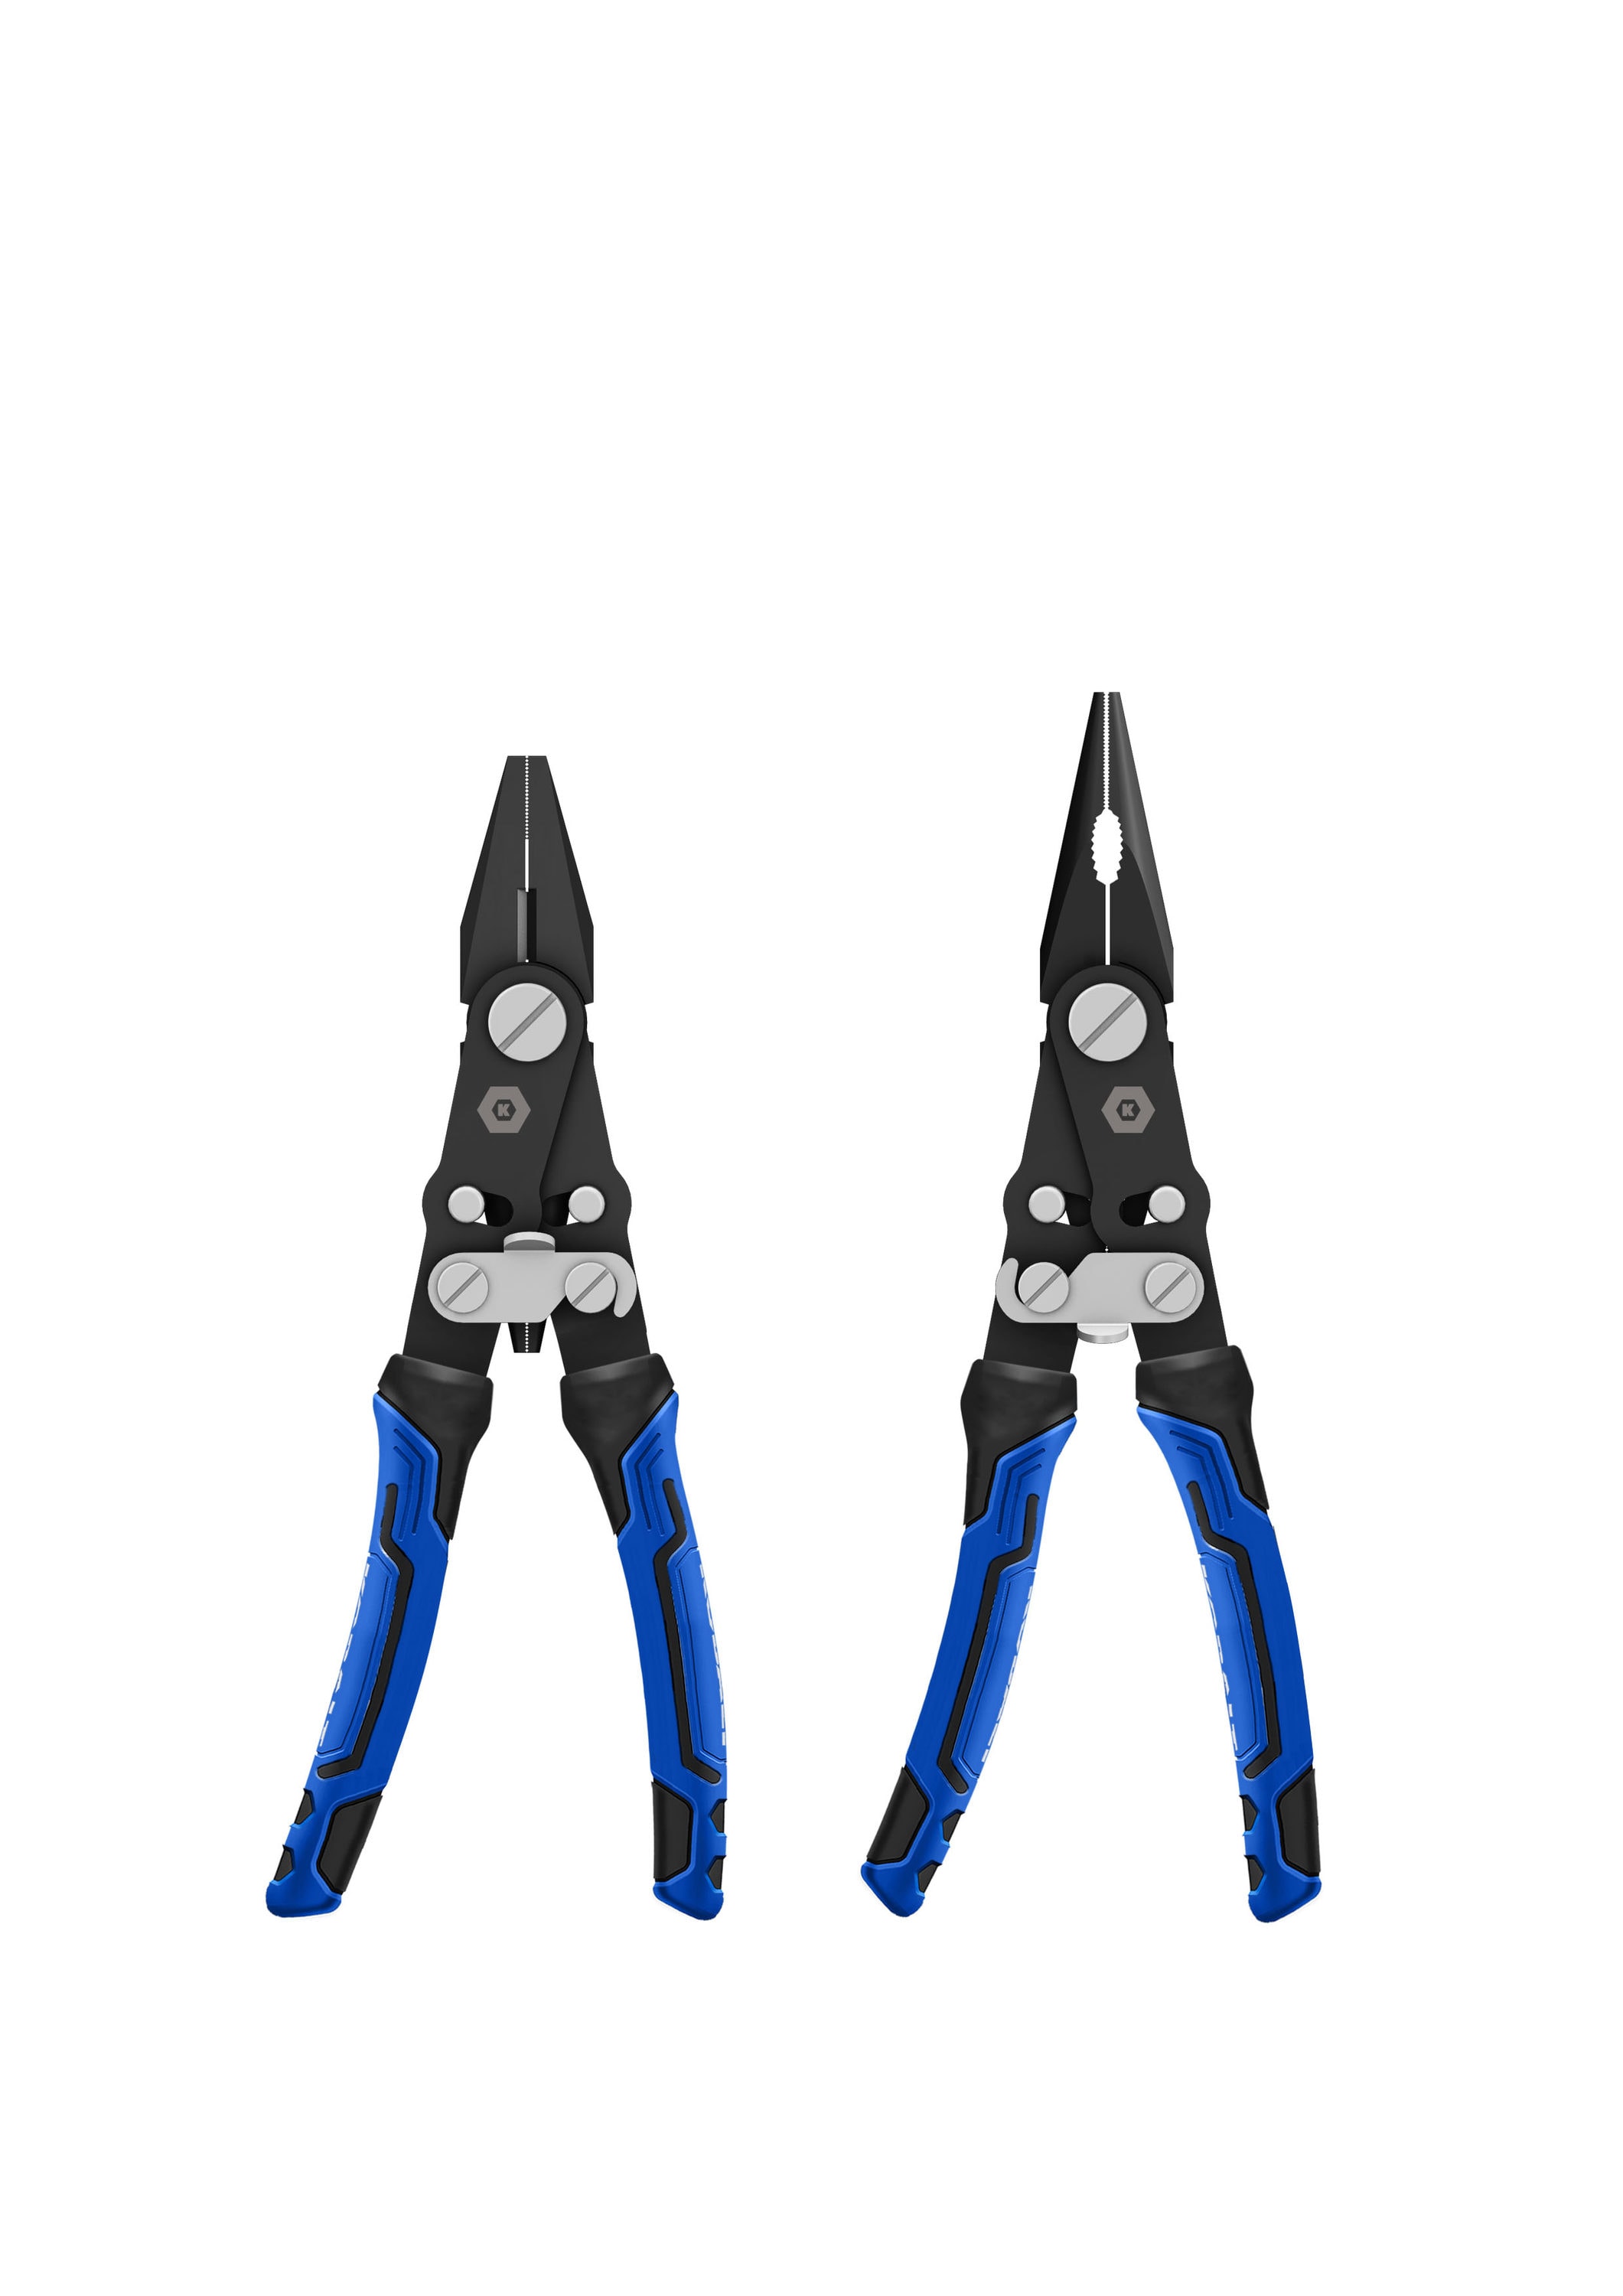 5.5 Inch Flat Nose Pliers, 5 Inch Duckbill Pliers and 5 Inch Smooth Jaw  Pliers Bundle for Opening Closing Jump Ring